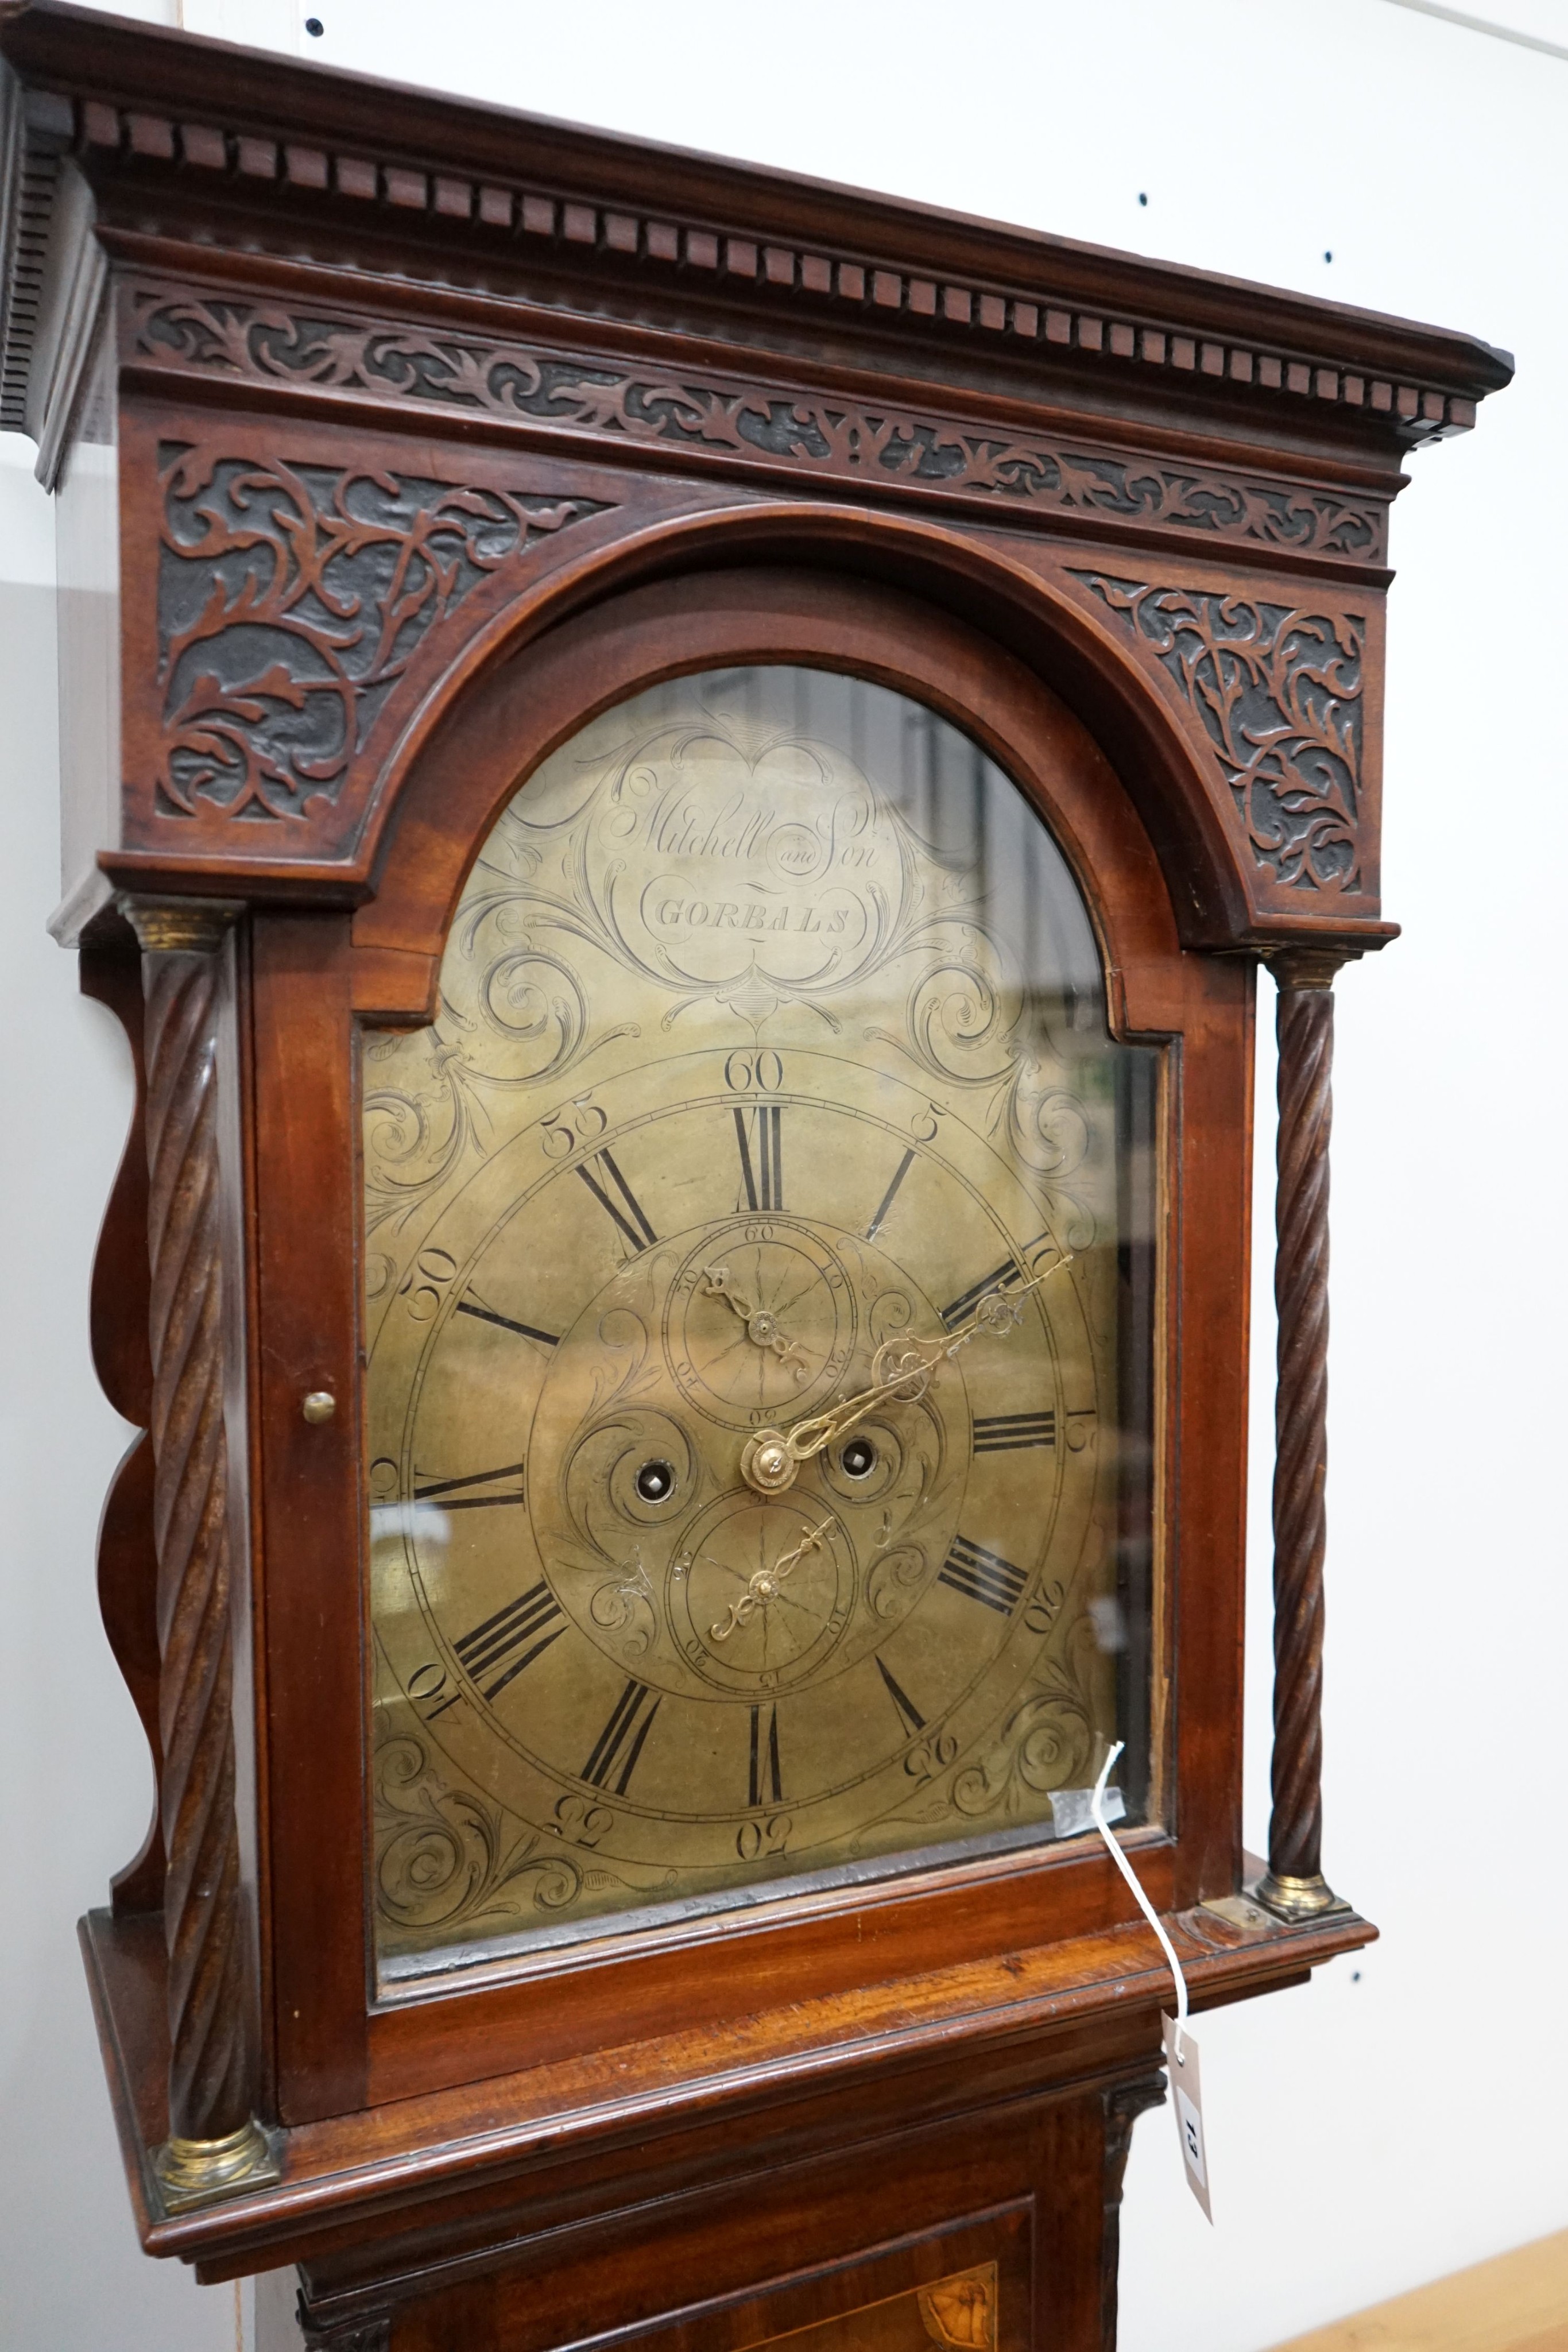 A George III inlaid mahogany 8 day longcase clock, marked Mitchell & Son, Gorbals, with key, - Image 2 of 5